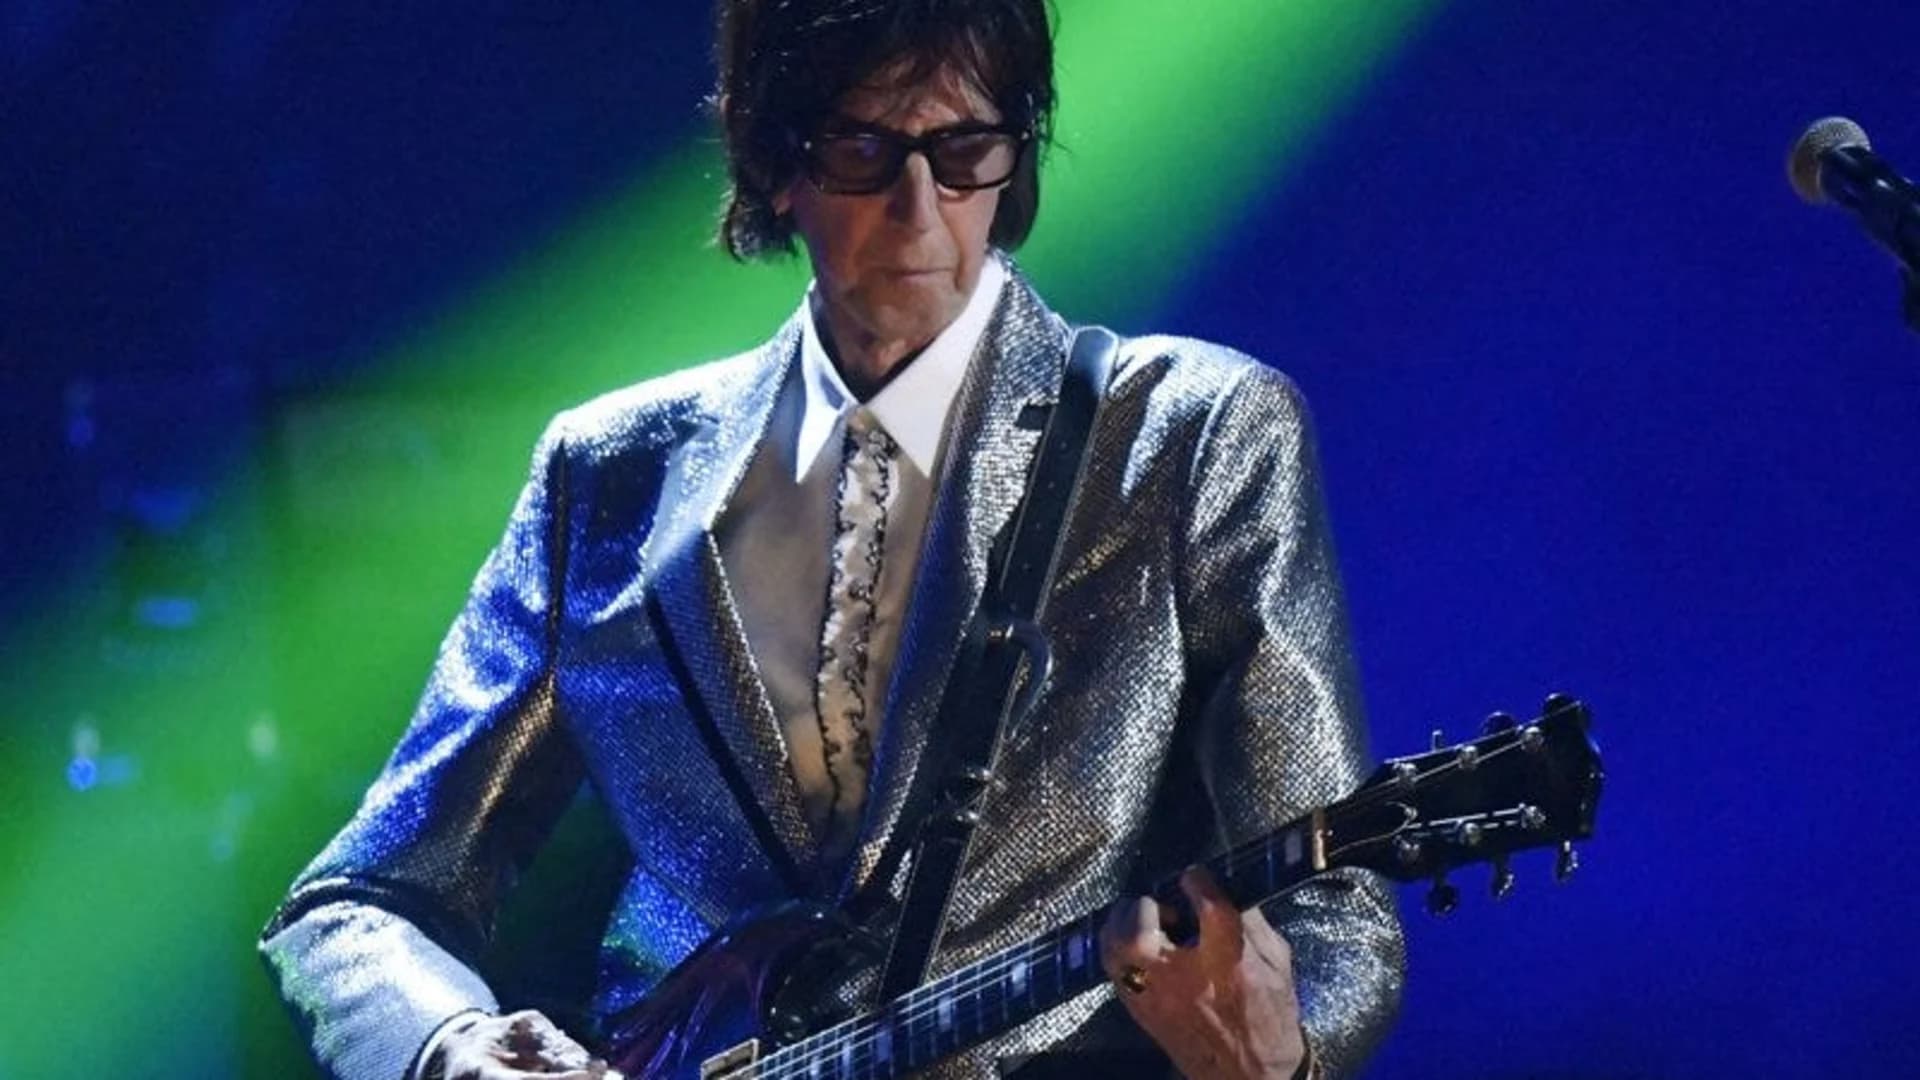 Police: Rock star Ric Ocasek found dead in NYC apartment